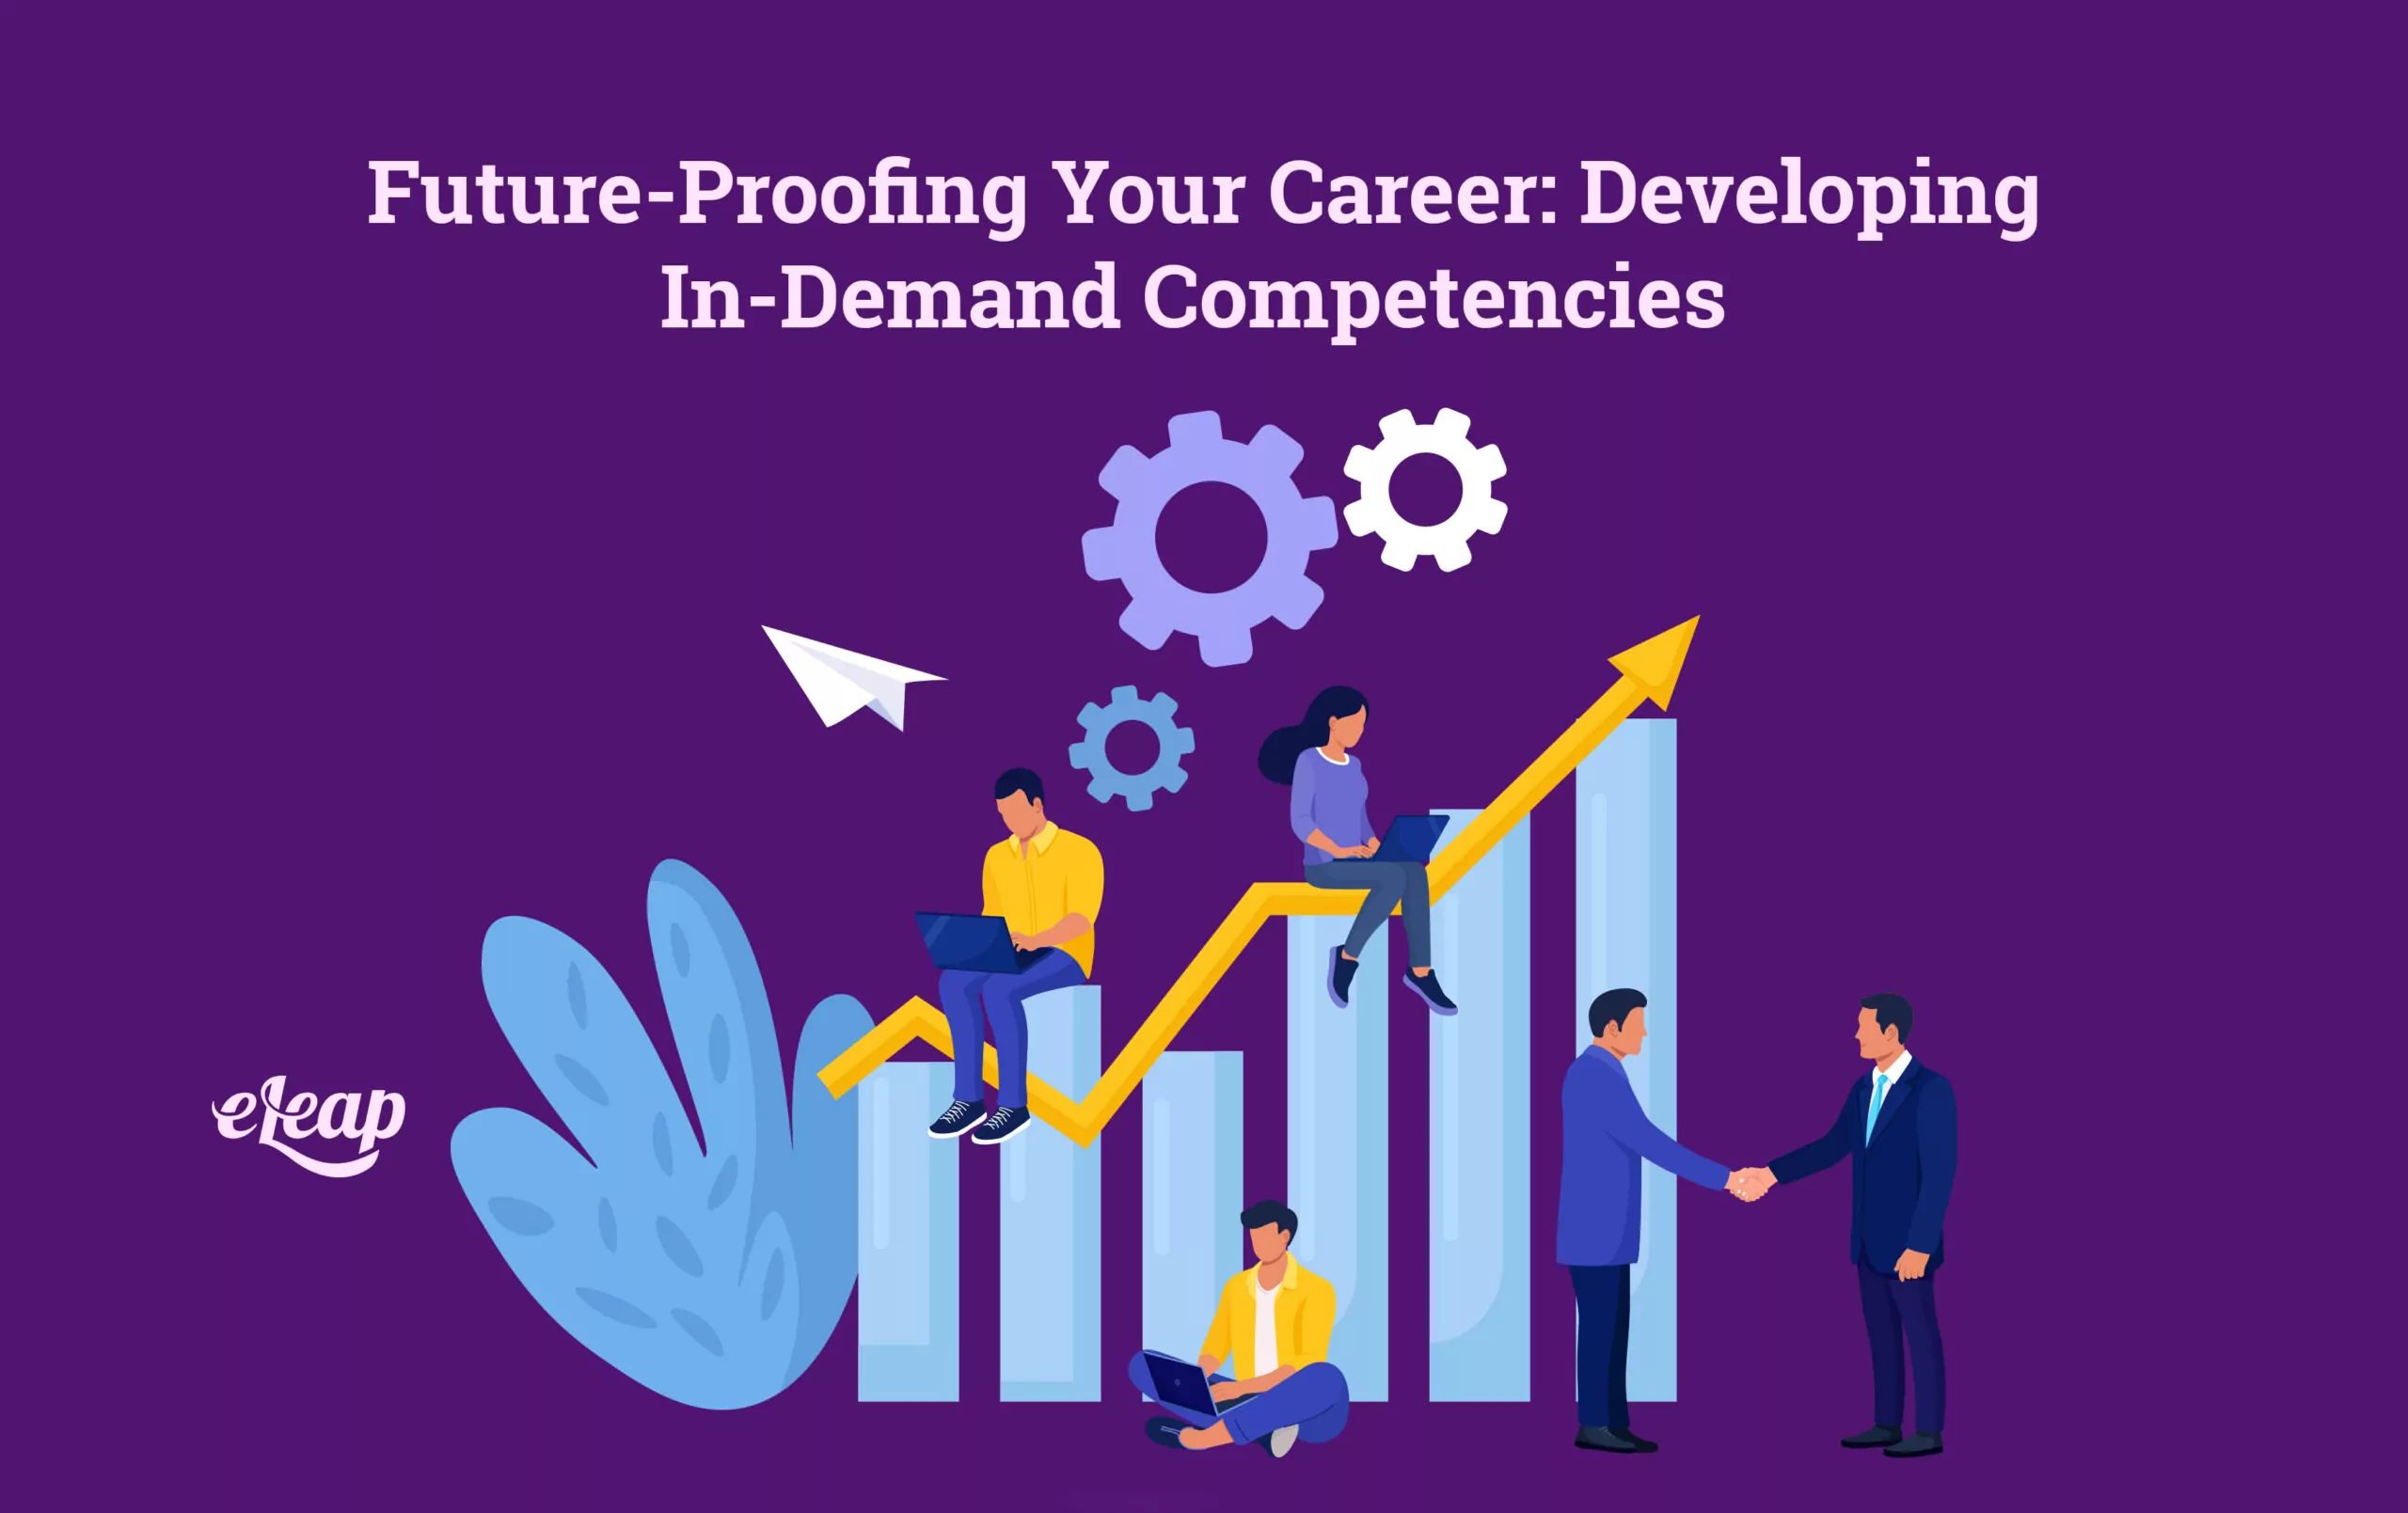 Future-Proofing Your Career: Developing In-Demand Competencies